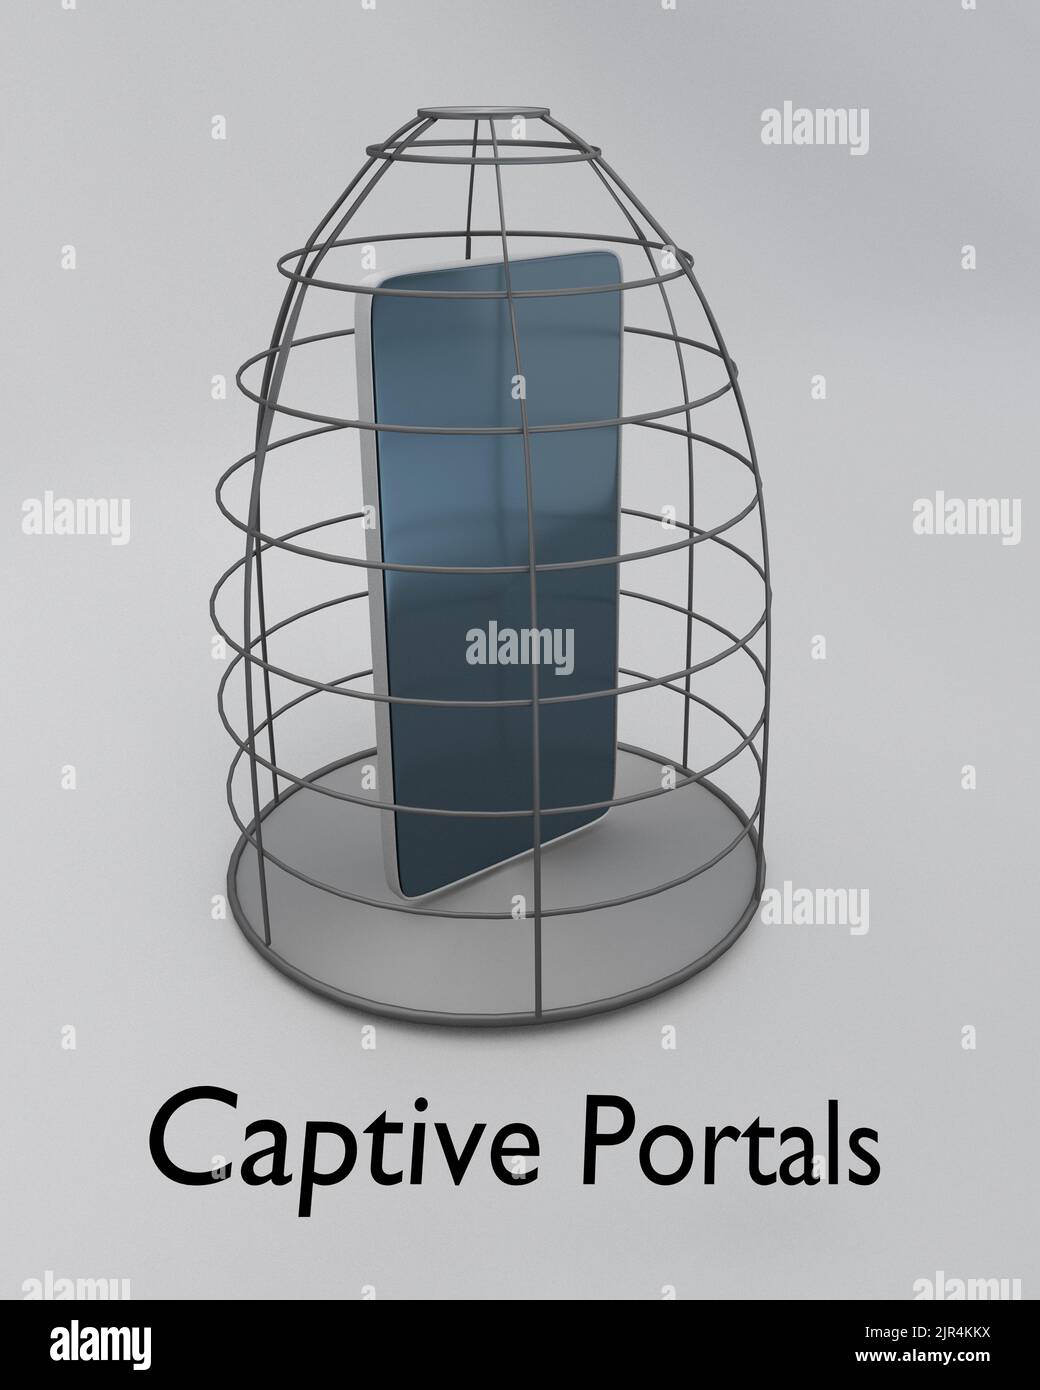 3D illustration of a cellular phone in a symbolic cage, along with the script Captive Portals. Stock Photo